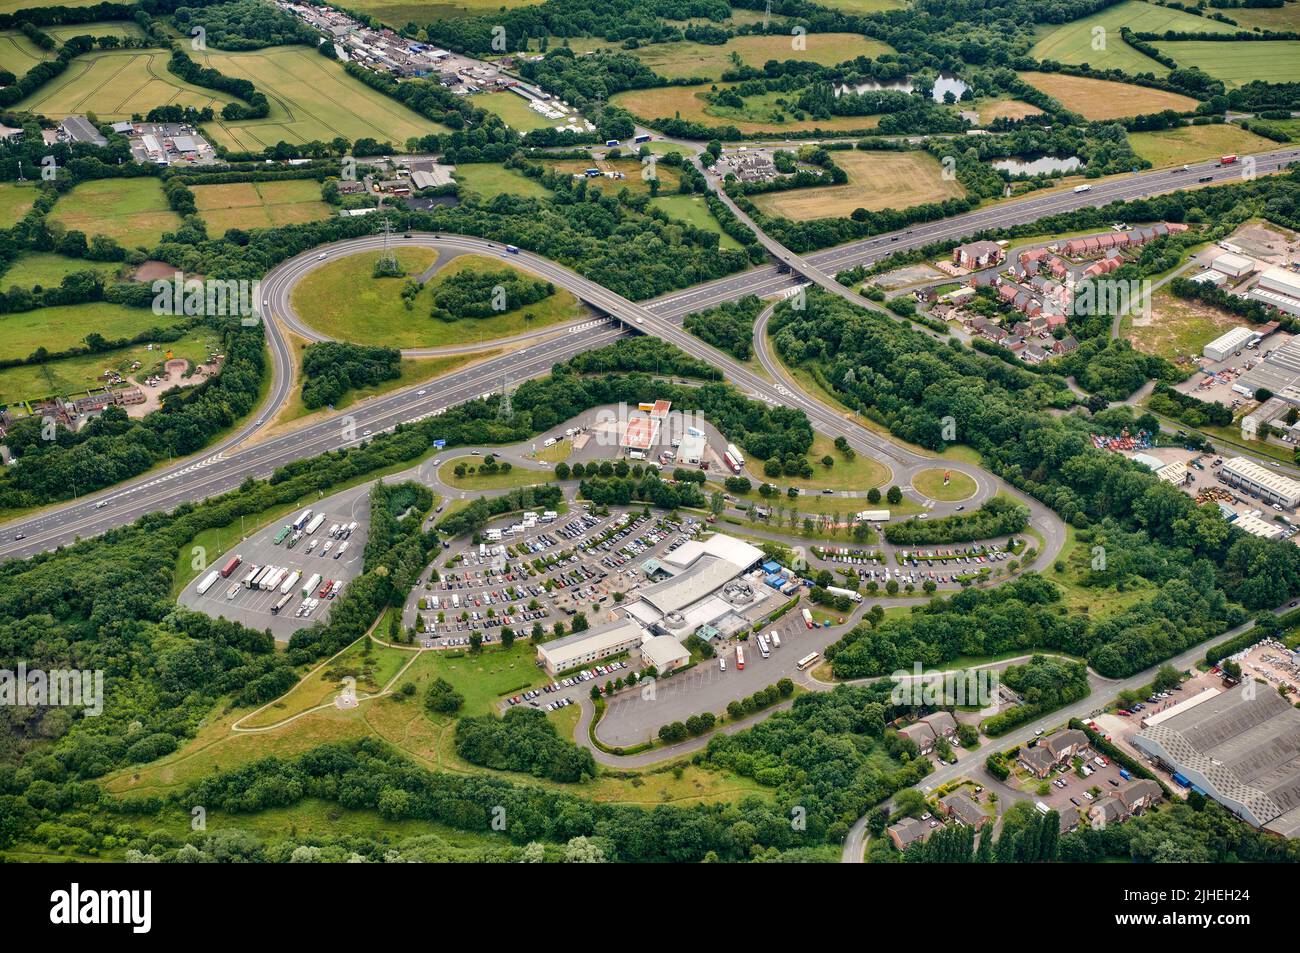 An aerial view of the Norton Canes services on the M6 Toll Motorway, near Cannock, West Midlands, UK, Shropshire hills in the distance Stock Photo